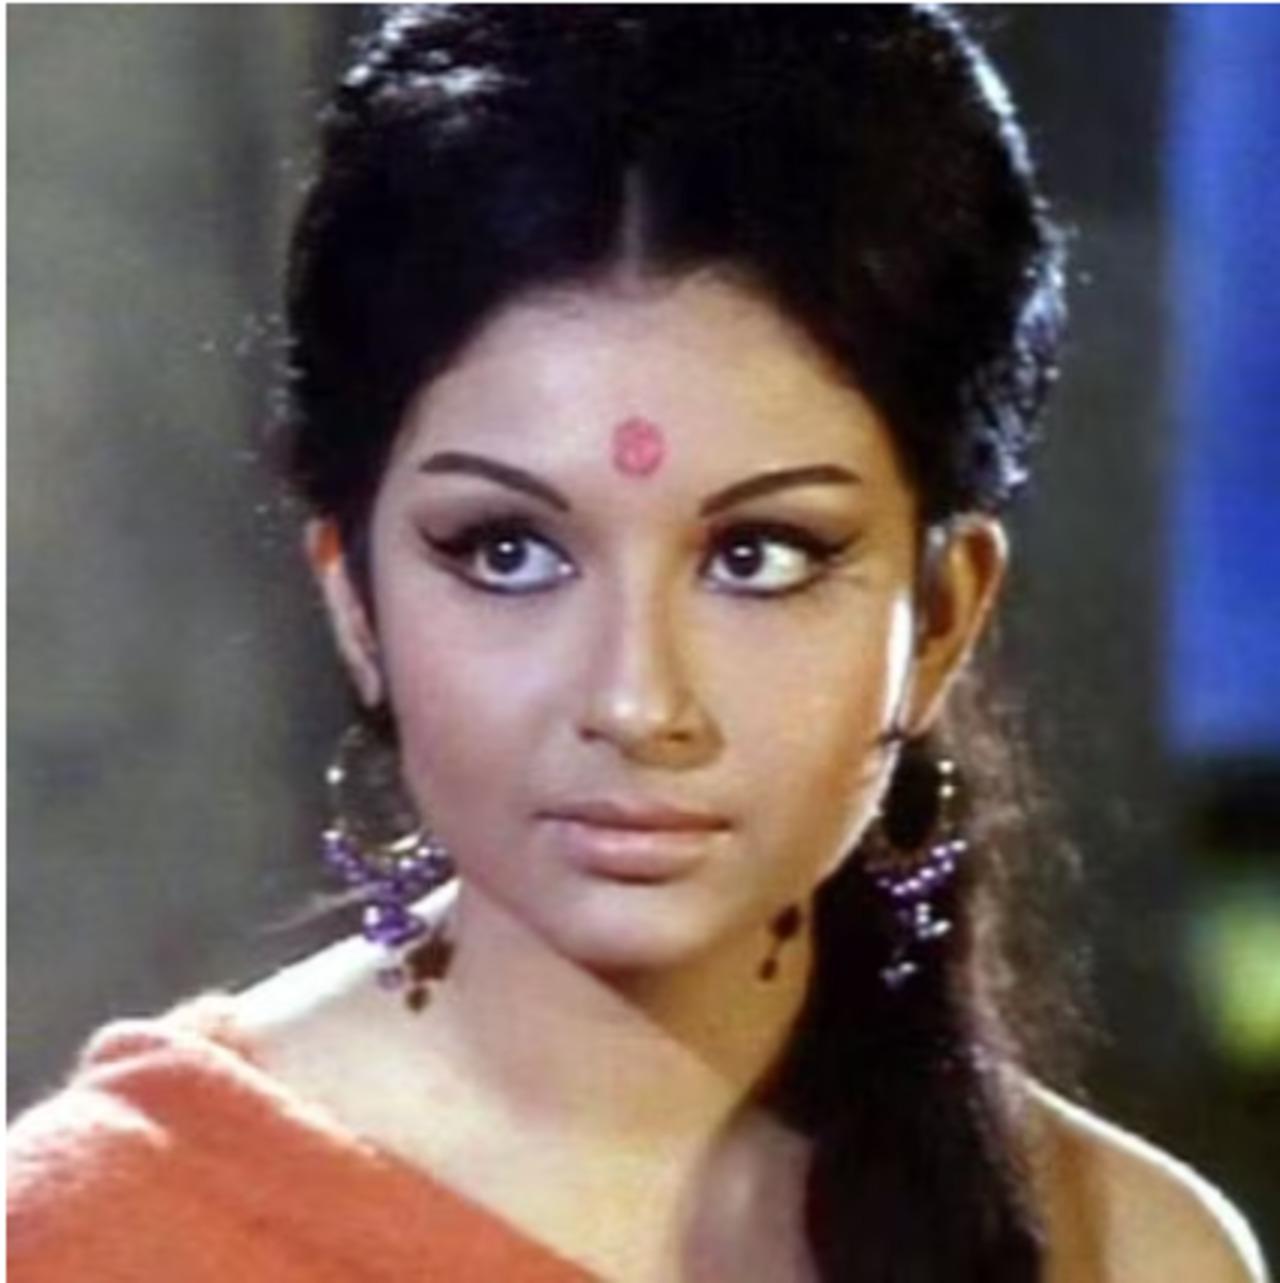 This hairstyle quickly gained popular currency across the industry. Other actresses like Waheeda Rahman and Saira Banu also followed in Sharmila Tagore's footsteps and sported this bouffant in many of their films